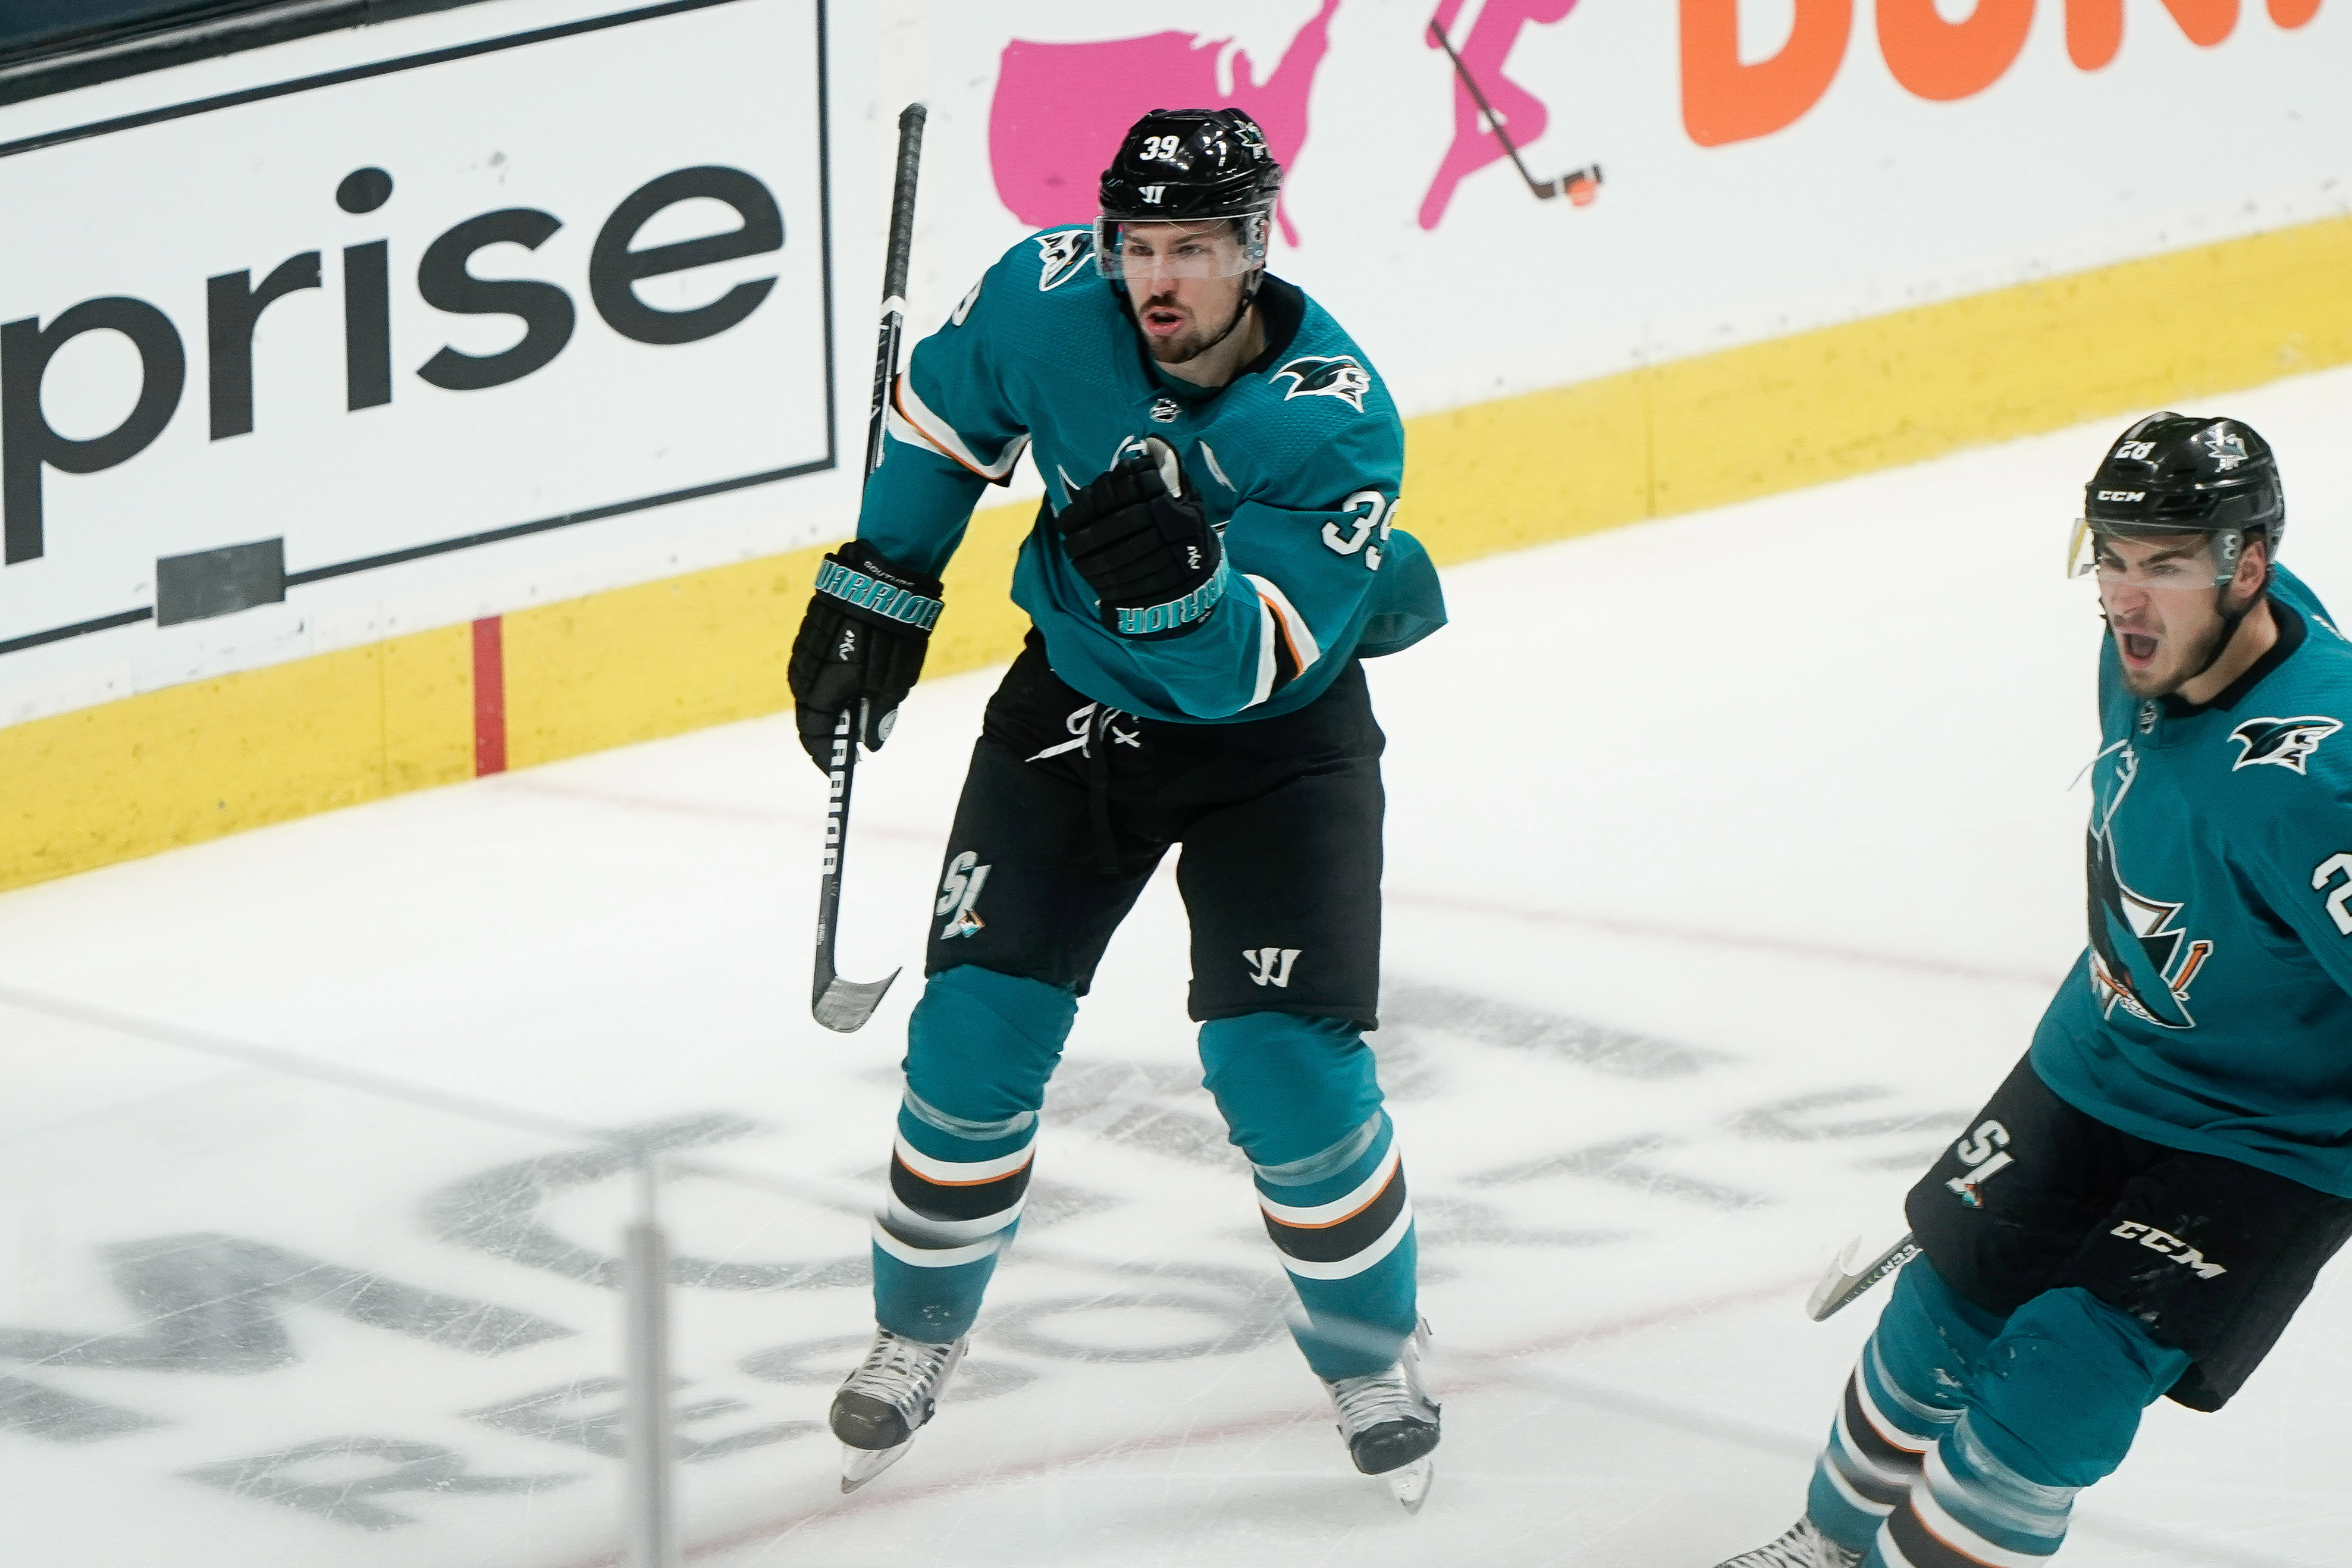 2019-05-12T012318Z_1924927638_NOCID_RTRMADP_3_NHL-STANLEY-CUP-PLAYOFFS-ST-LOUIS-BLUES-AT-SAN-JOSE-SHARKS